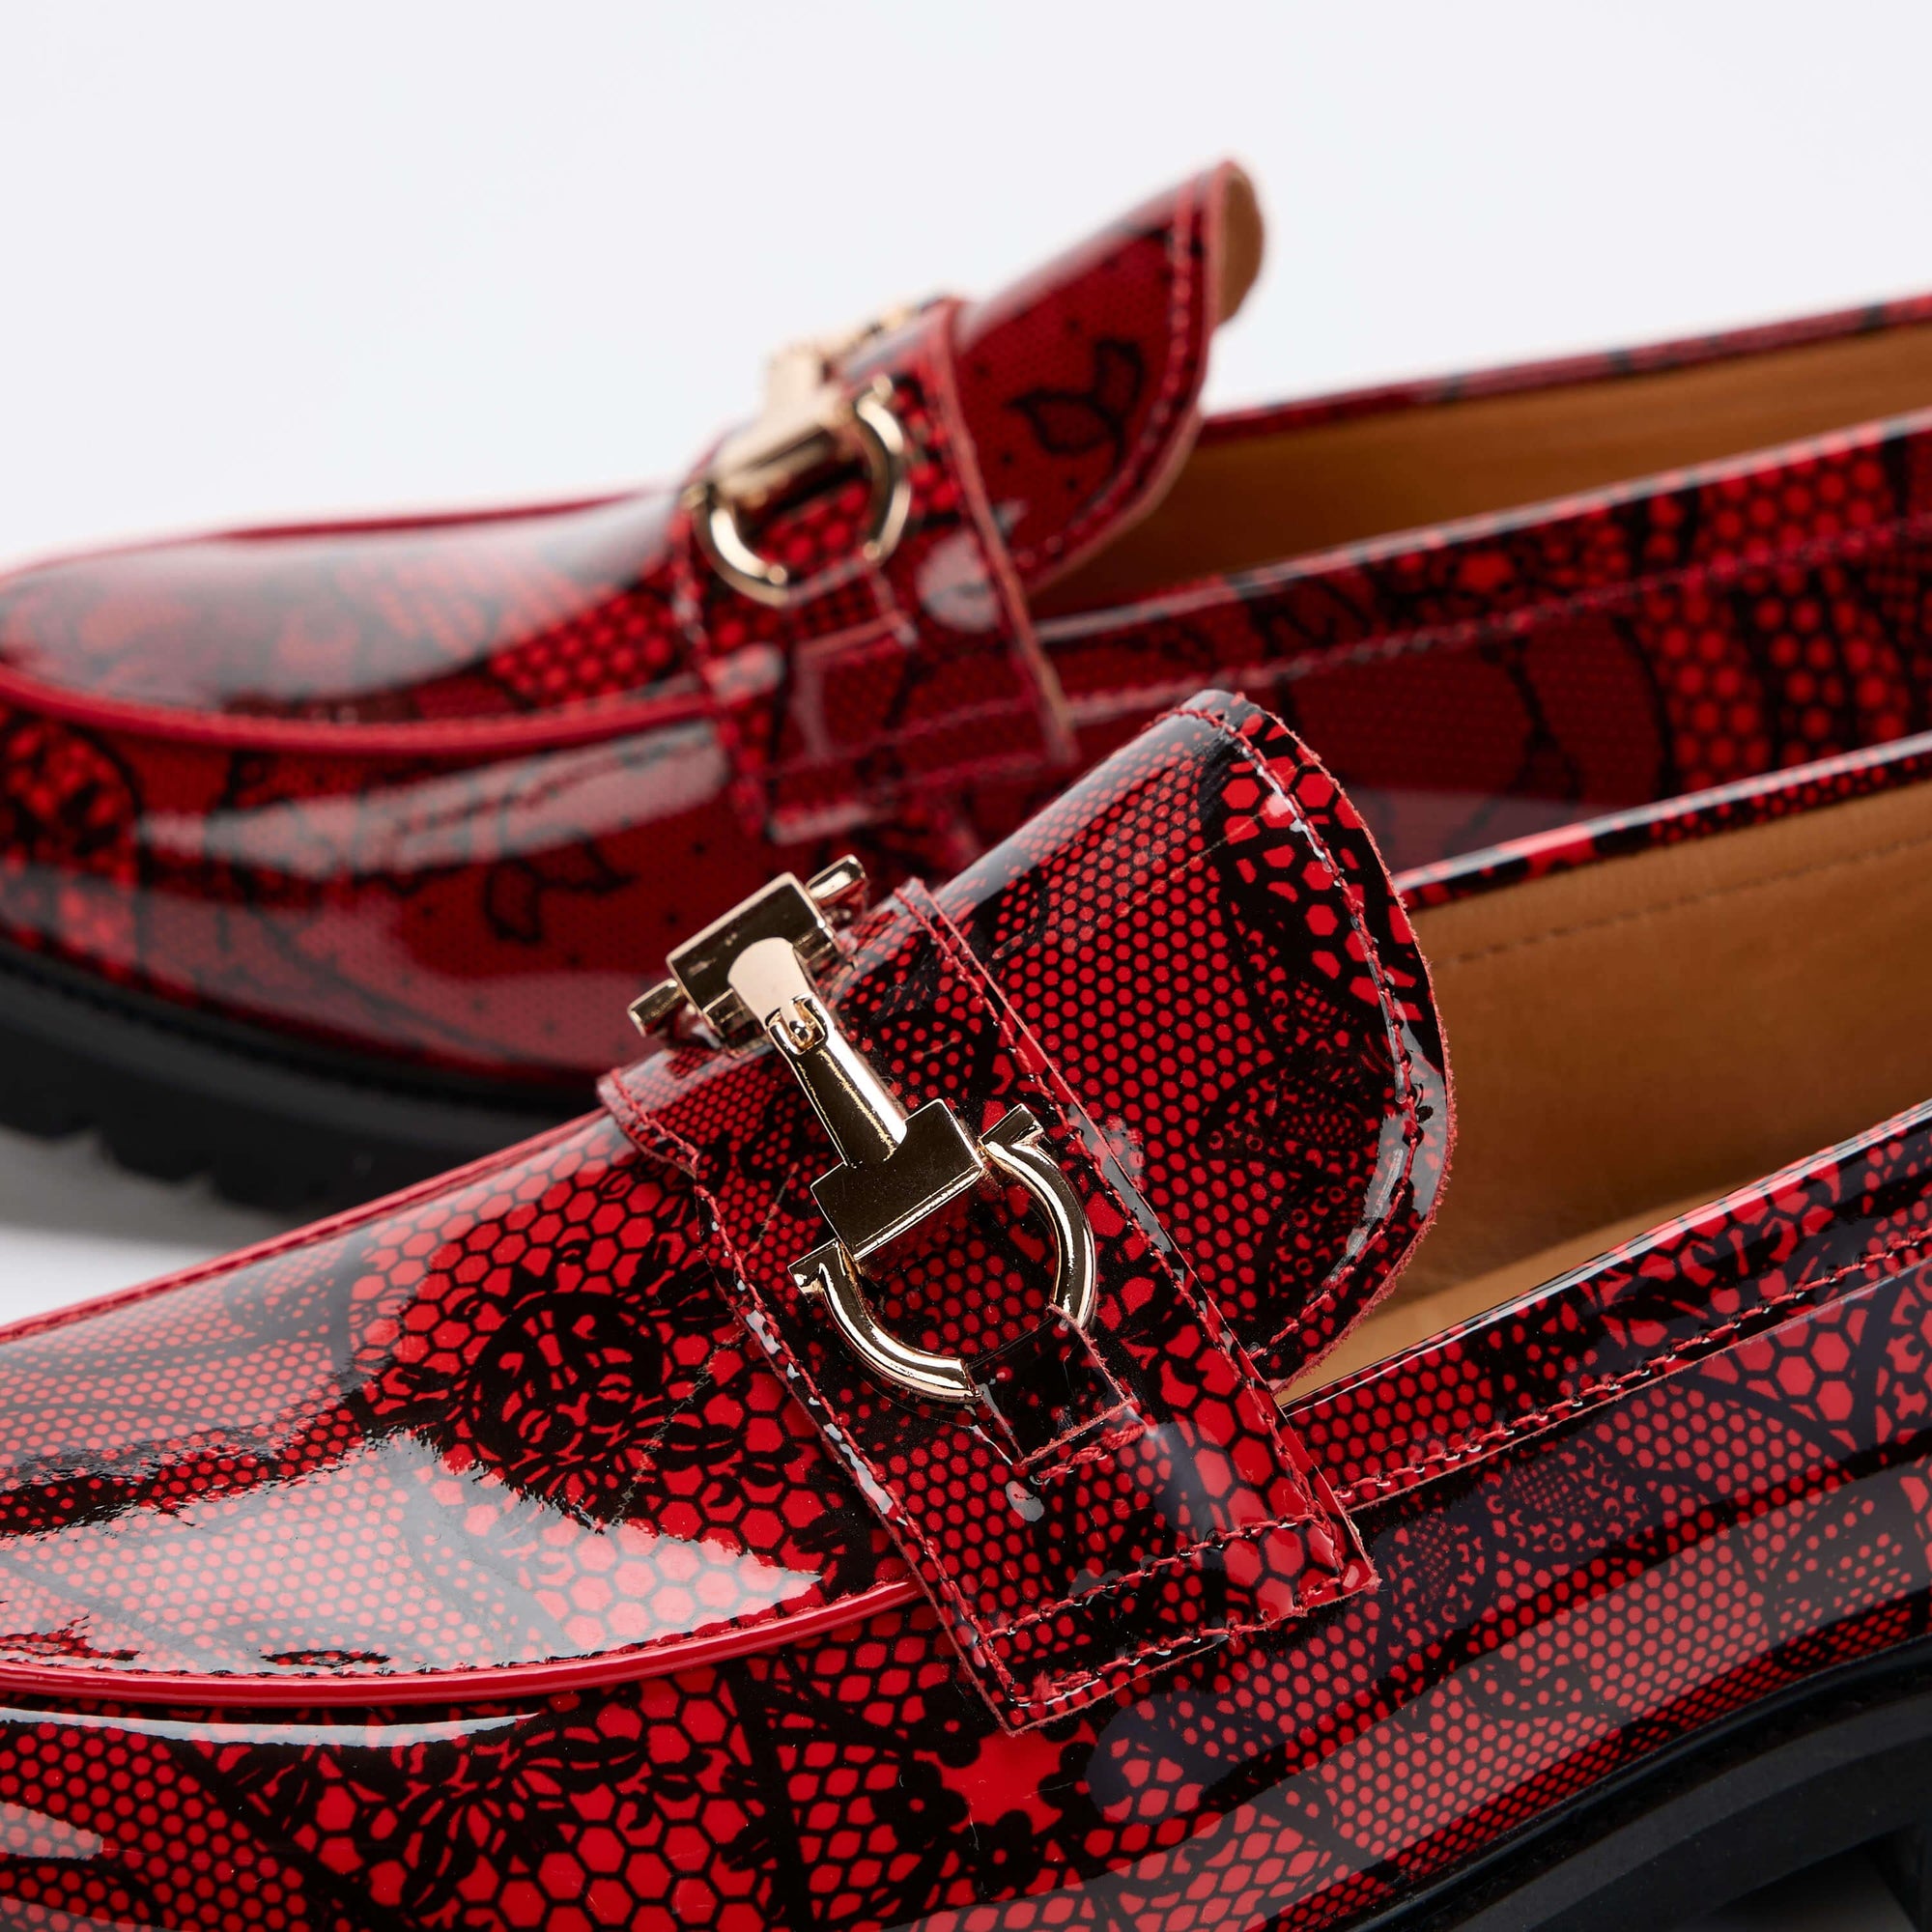 womens red patent leather bit loafers